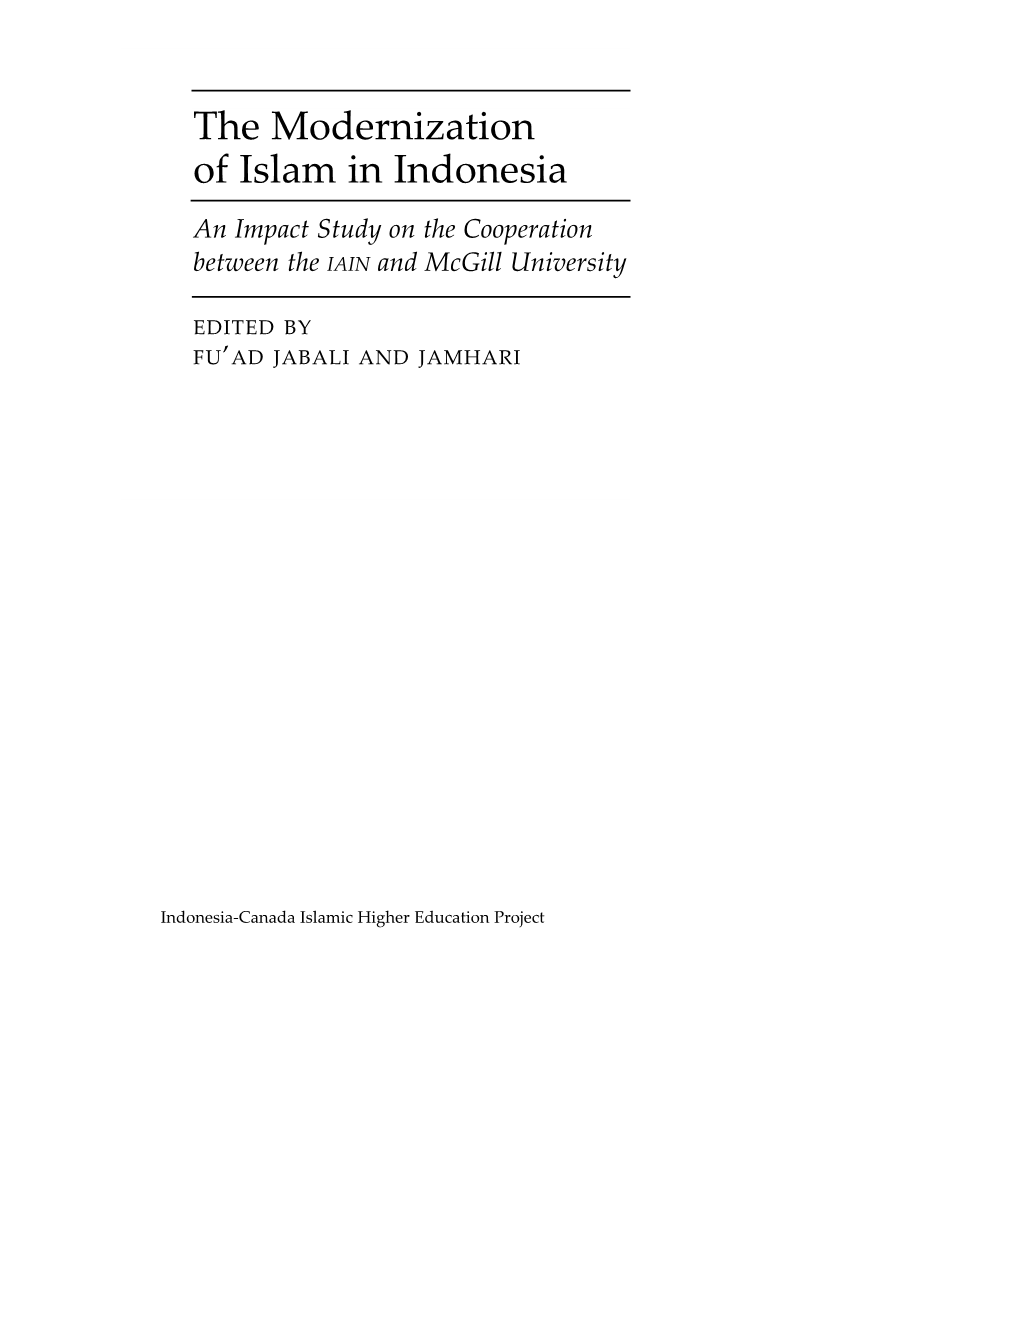 The Modernization of Islam in Indonesia an Impact Study on the Cooperation Between the IAIN and Mcgill University